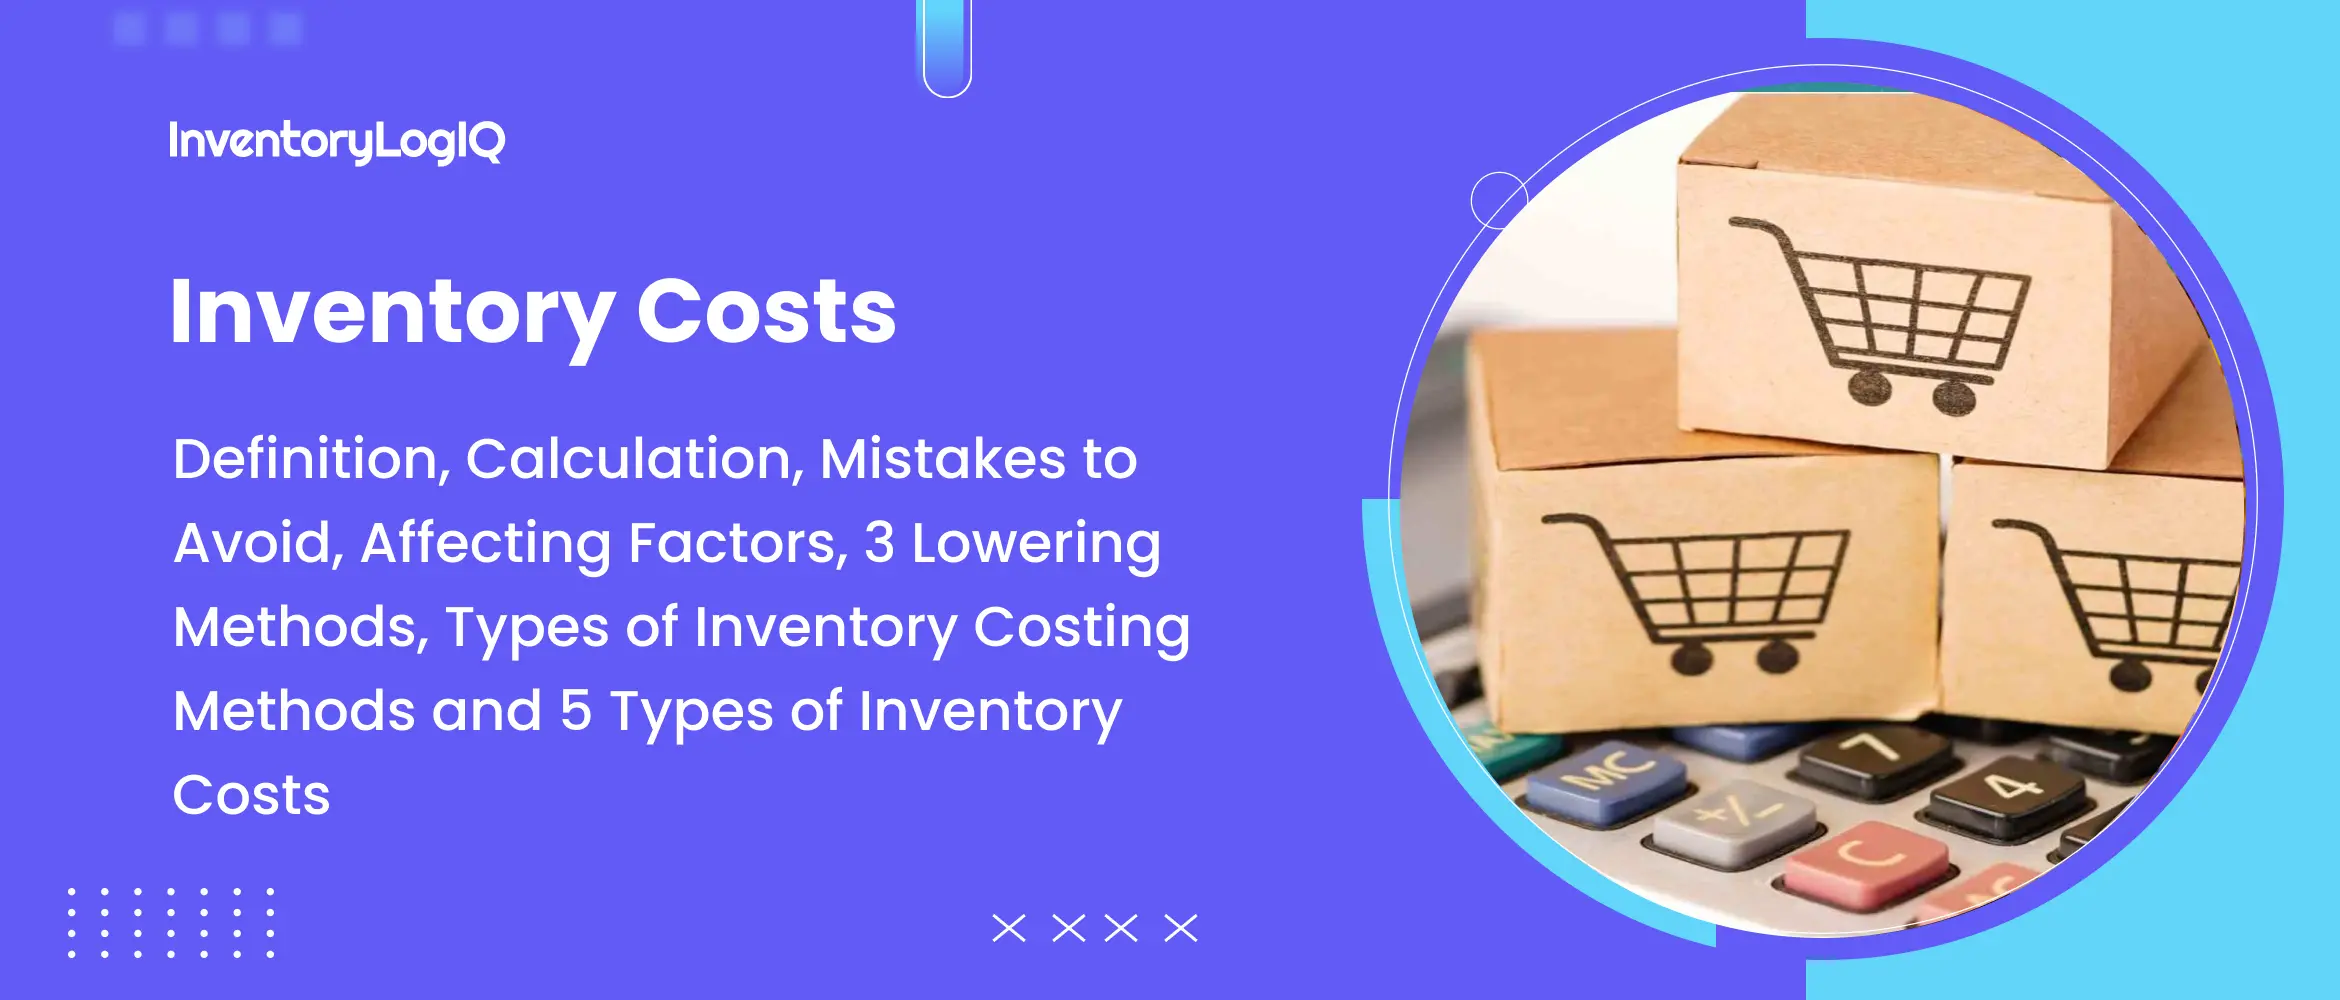 Inventory Costs: Definition, Calculation, Mistakes to Avoid, Affecting Factors, 3 Lowering Methods, Types of Inventory Costing Methods and 5 Types of Inventory Costs in 2023 